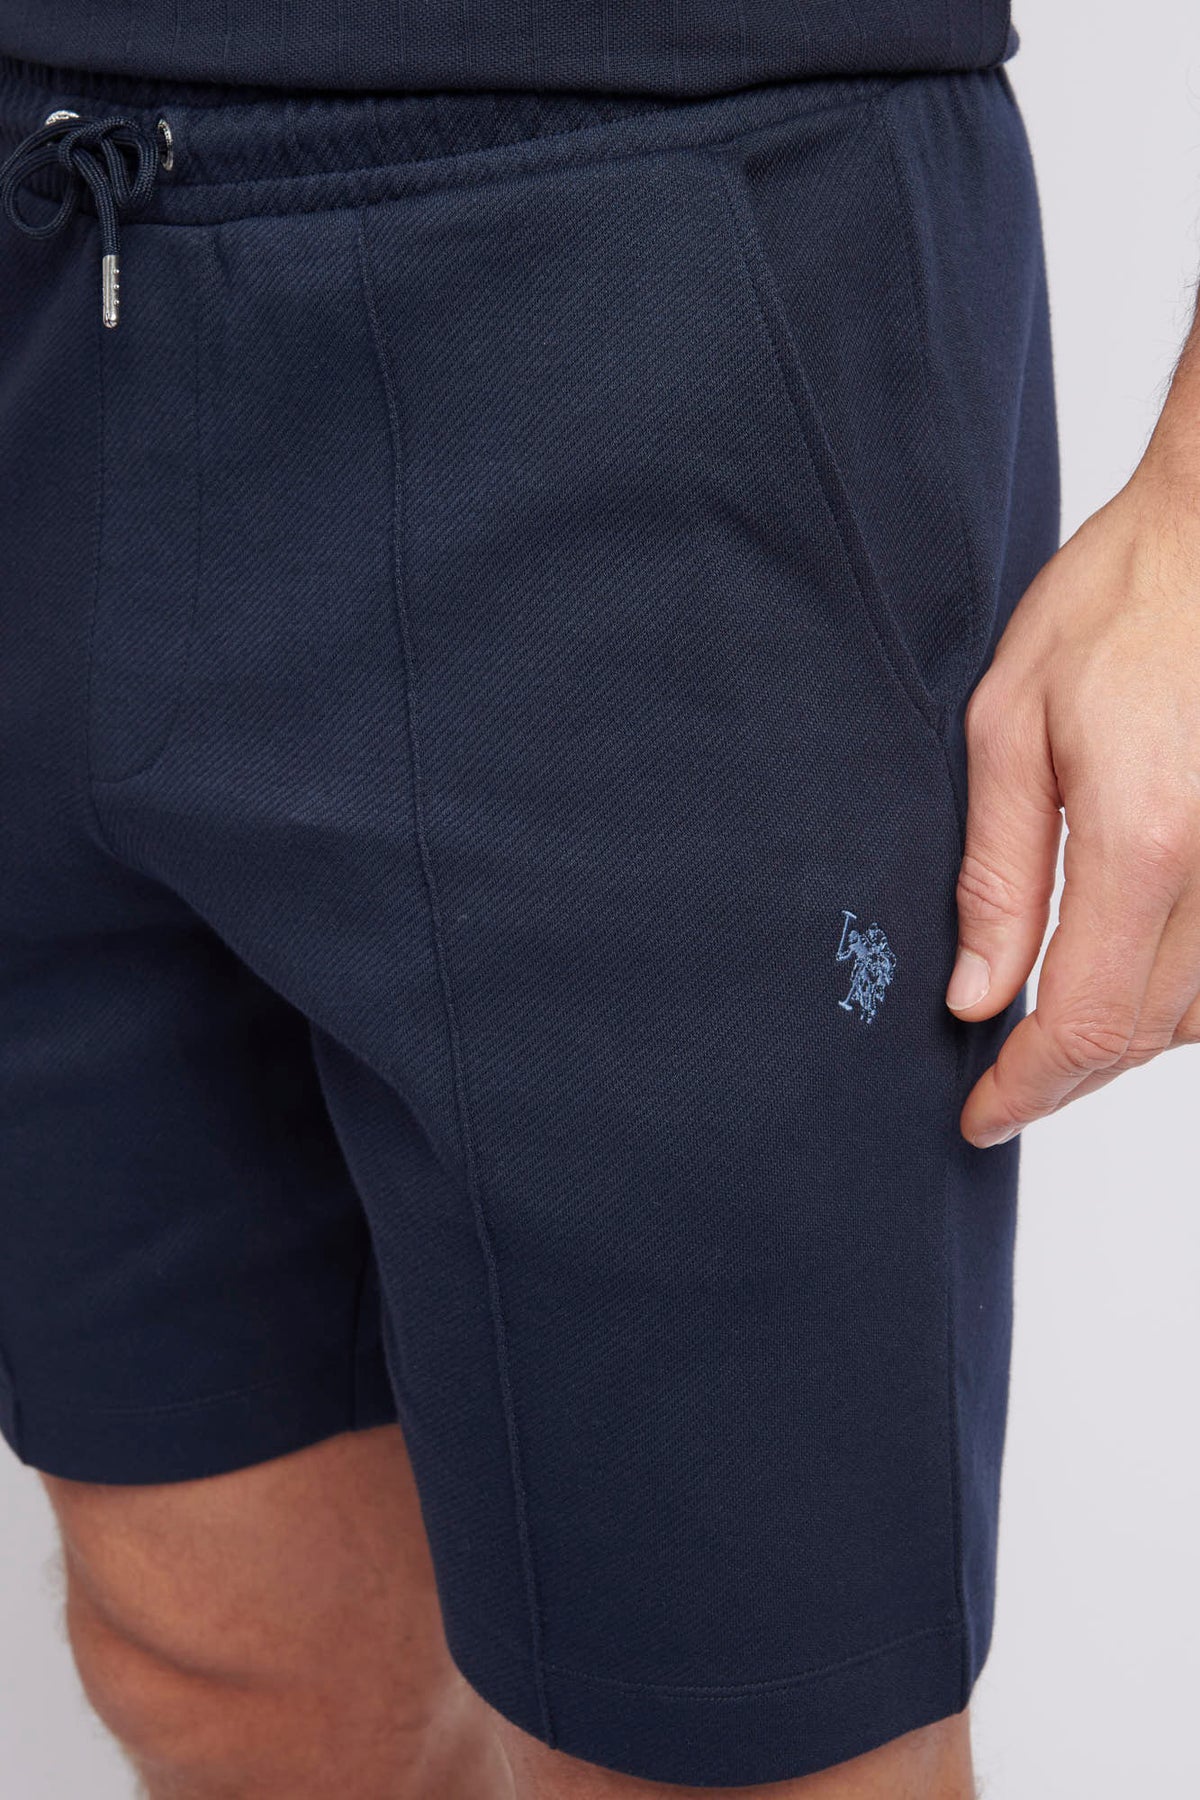 Mens Classic Fit Pin Tuck Shorts in Dark Sapphire Navy